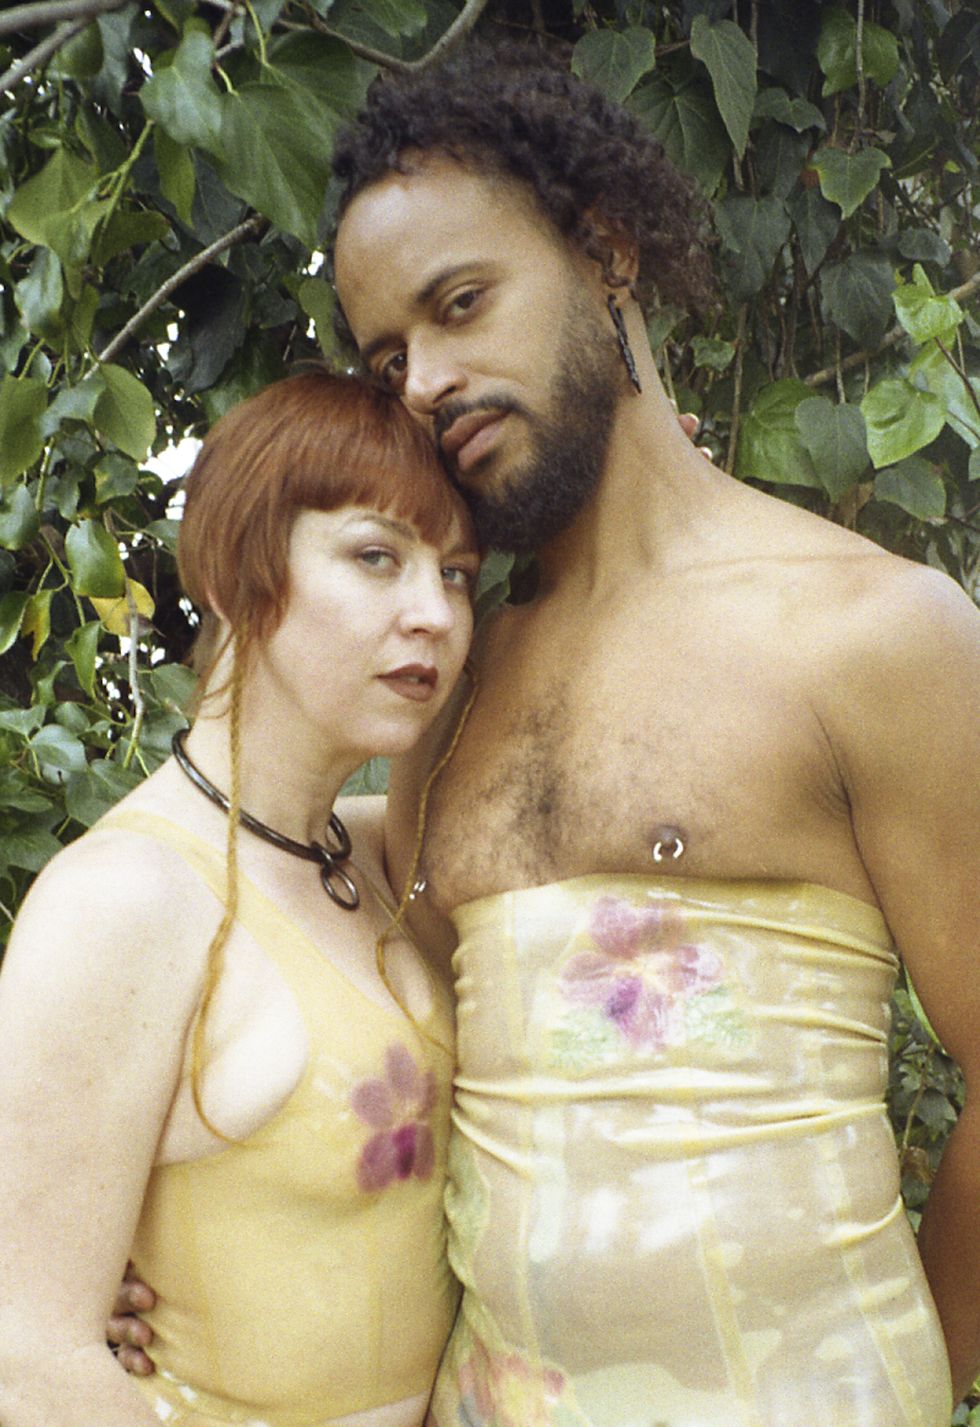 a man and a woman in bdsm attire gazing at the camera and embracing